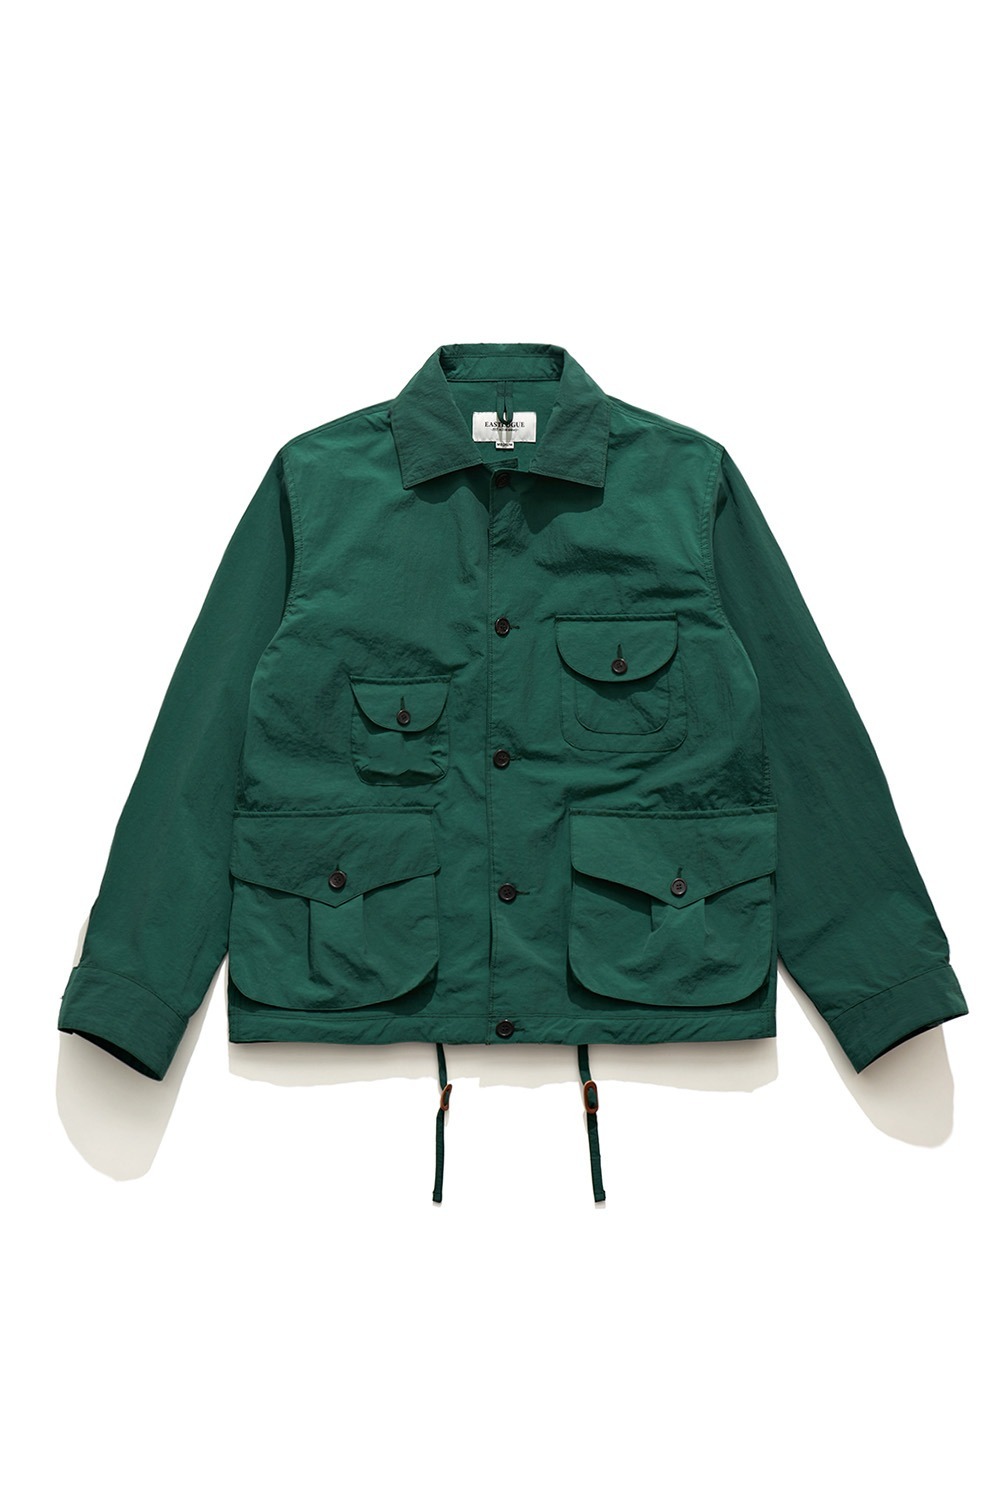 TRAPPER JACKET / GREEN RIPSTOP